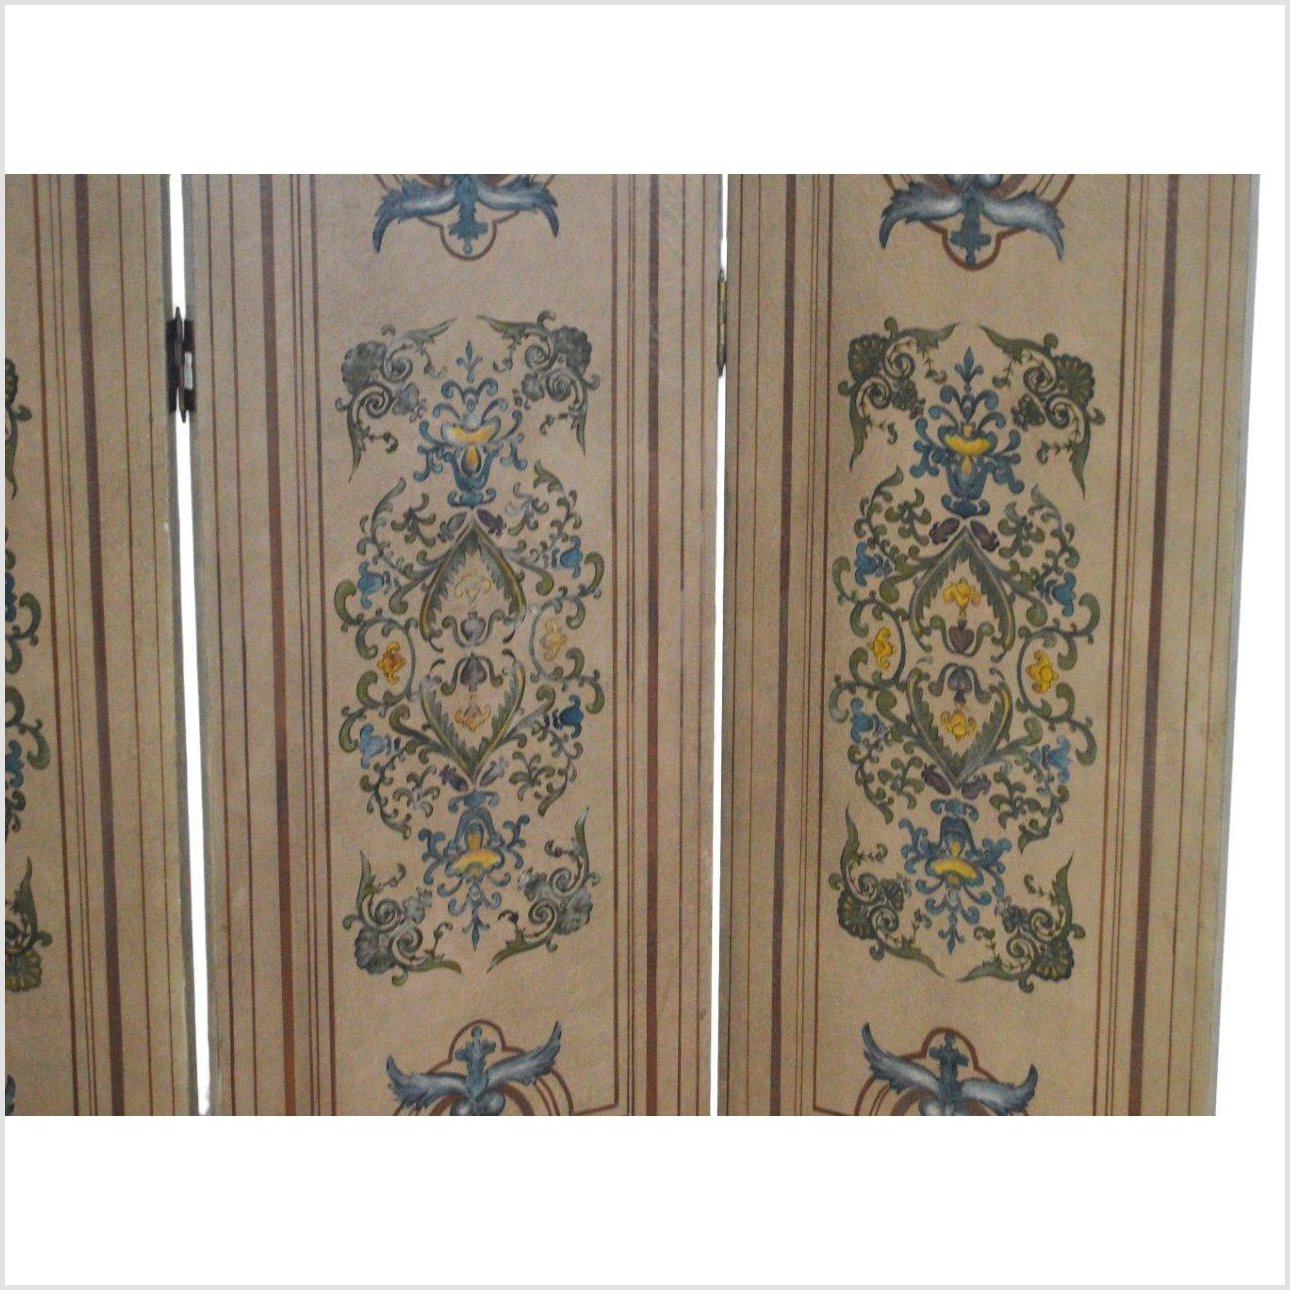 4-Panel Victorian Style Designed Screen-YN2836-6. Asian & Chinese Furniture, Art, Antiques, Vintage Home Décor for sale at FEA Home